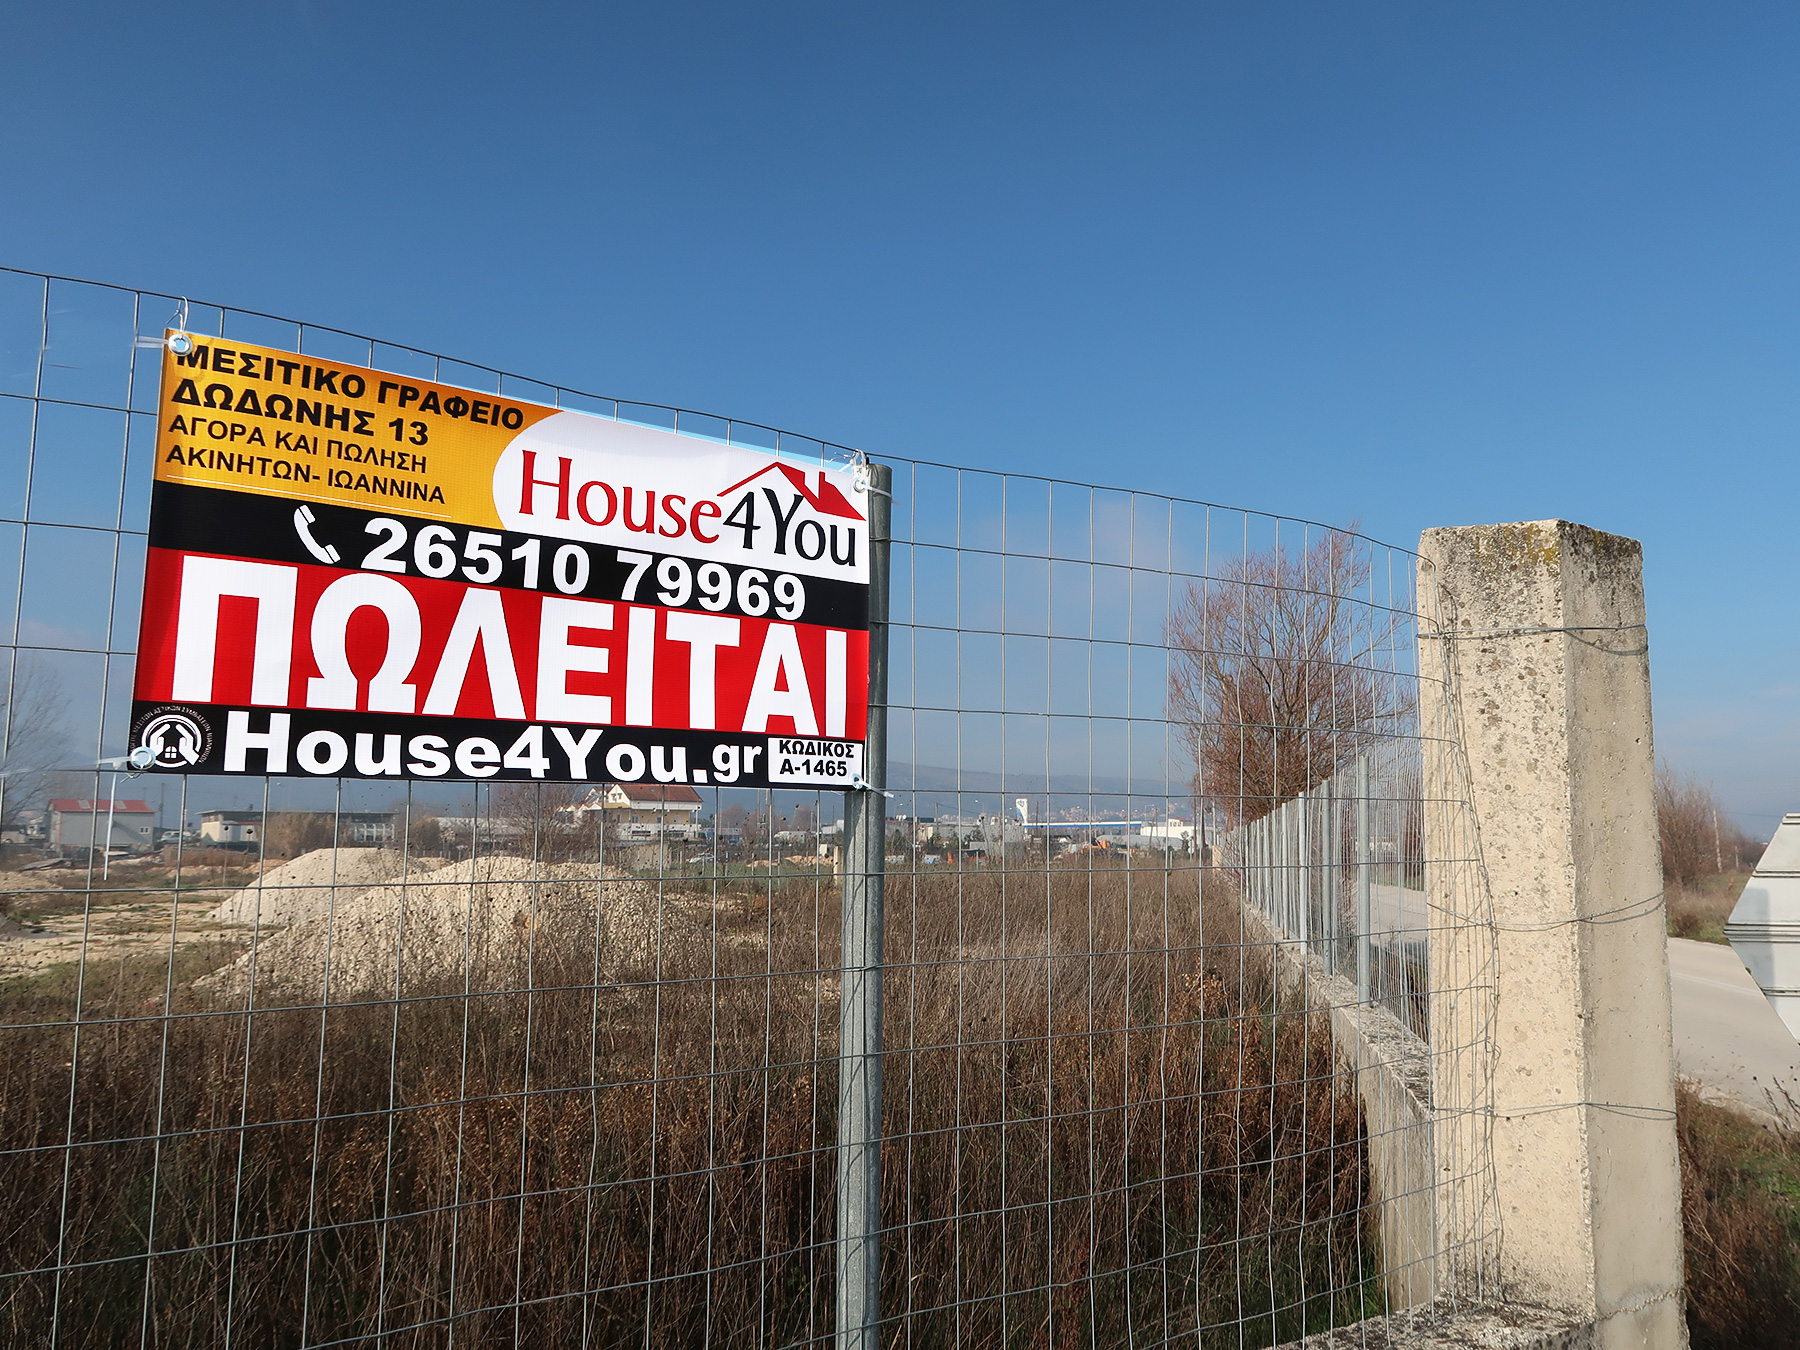 Plot of land 4,820 sq.m. for sale in the 6th km of Ioannina Athens avenue at Neokaisaria area Ioannina